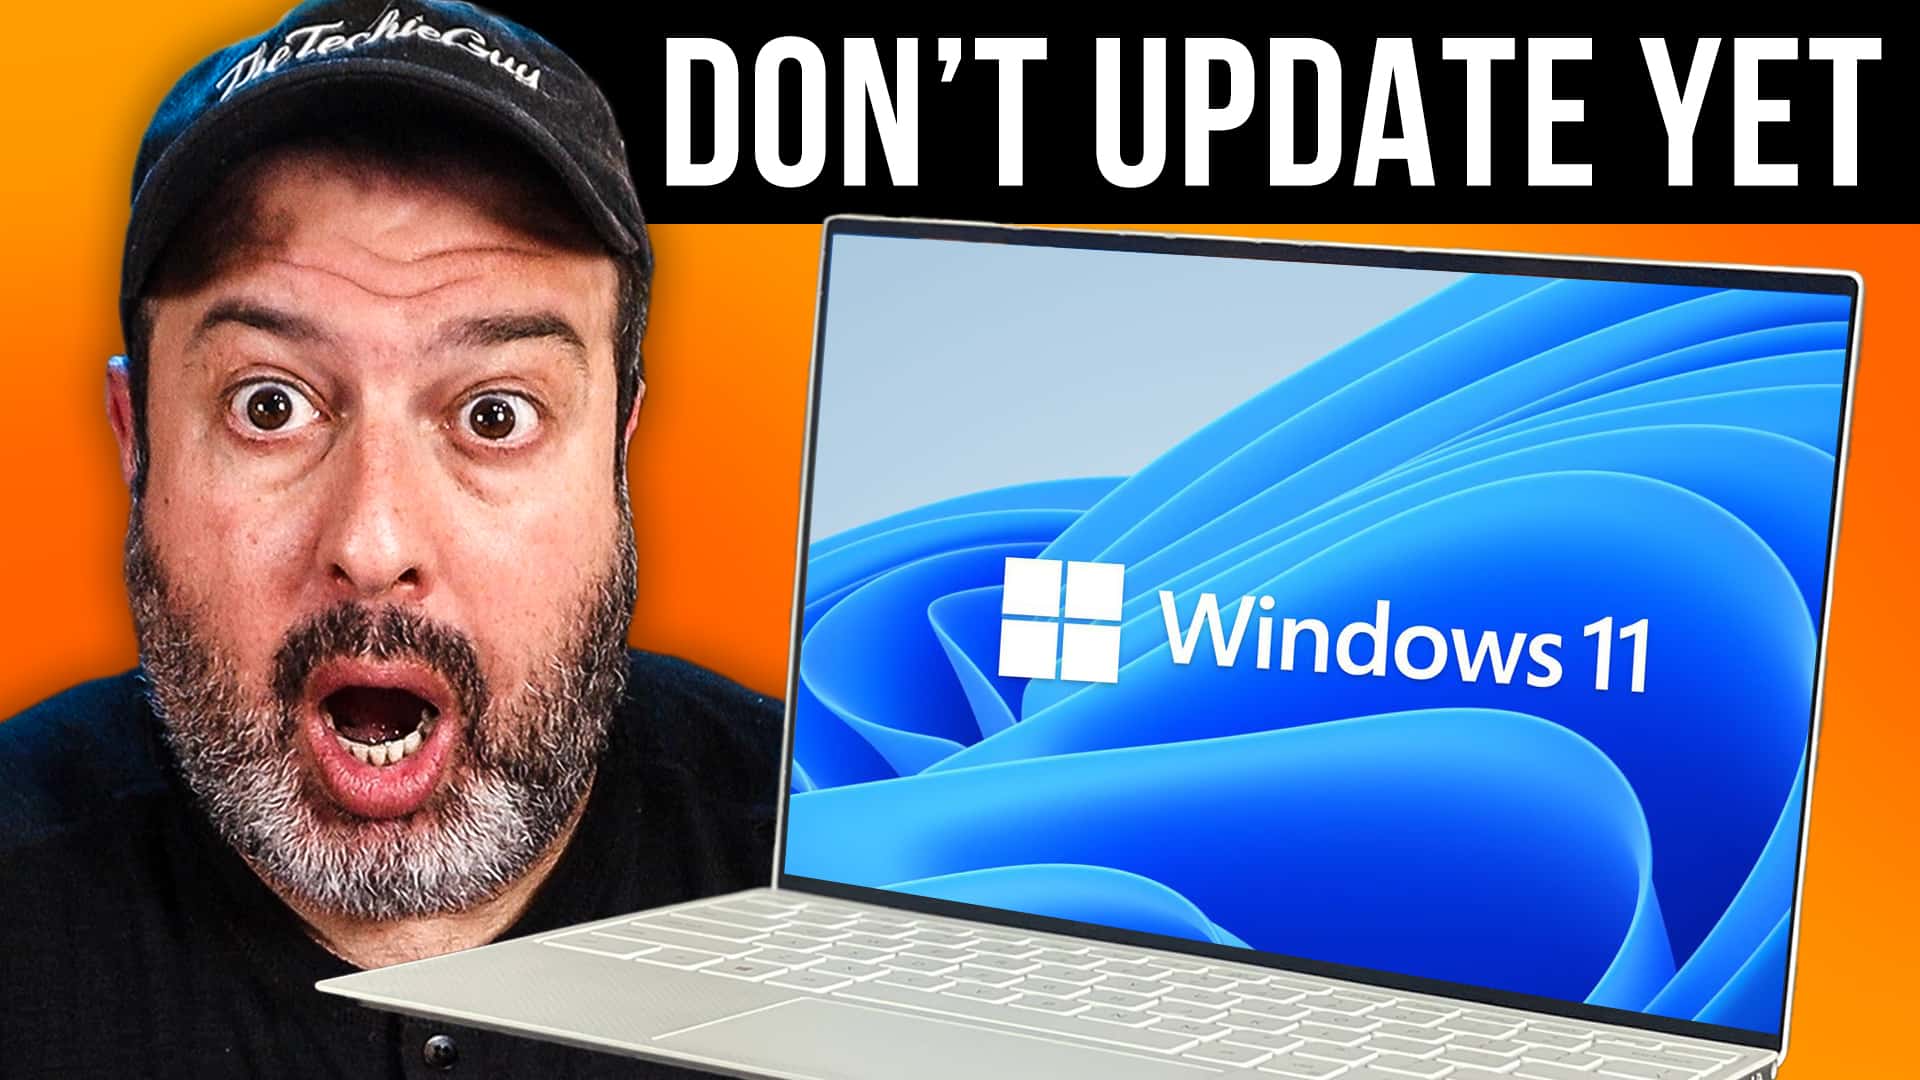 5 steps you must take BEFORE updating to Windows 11